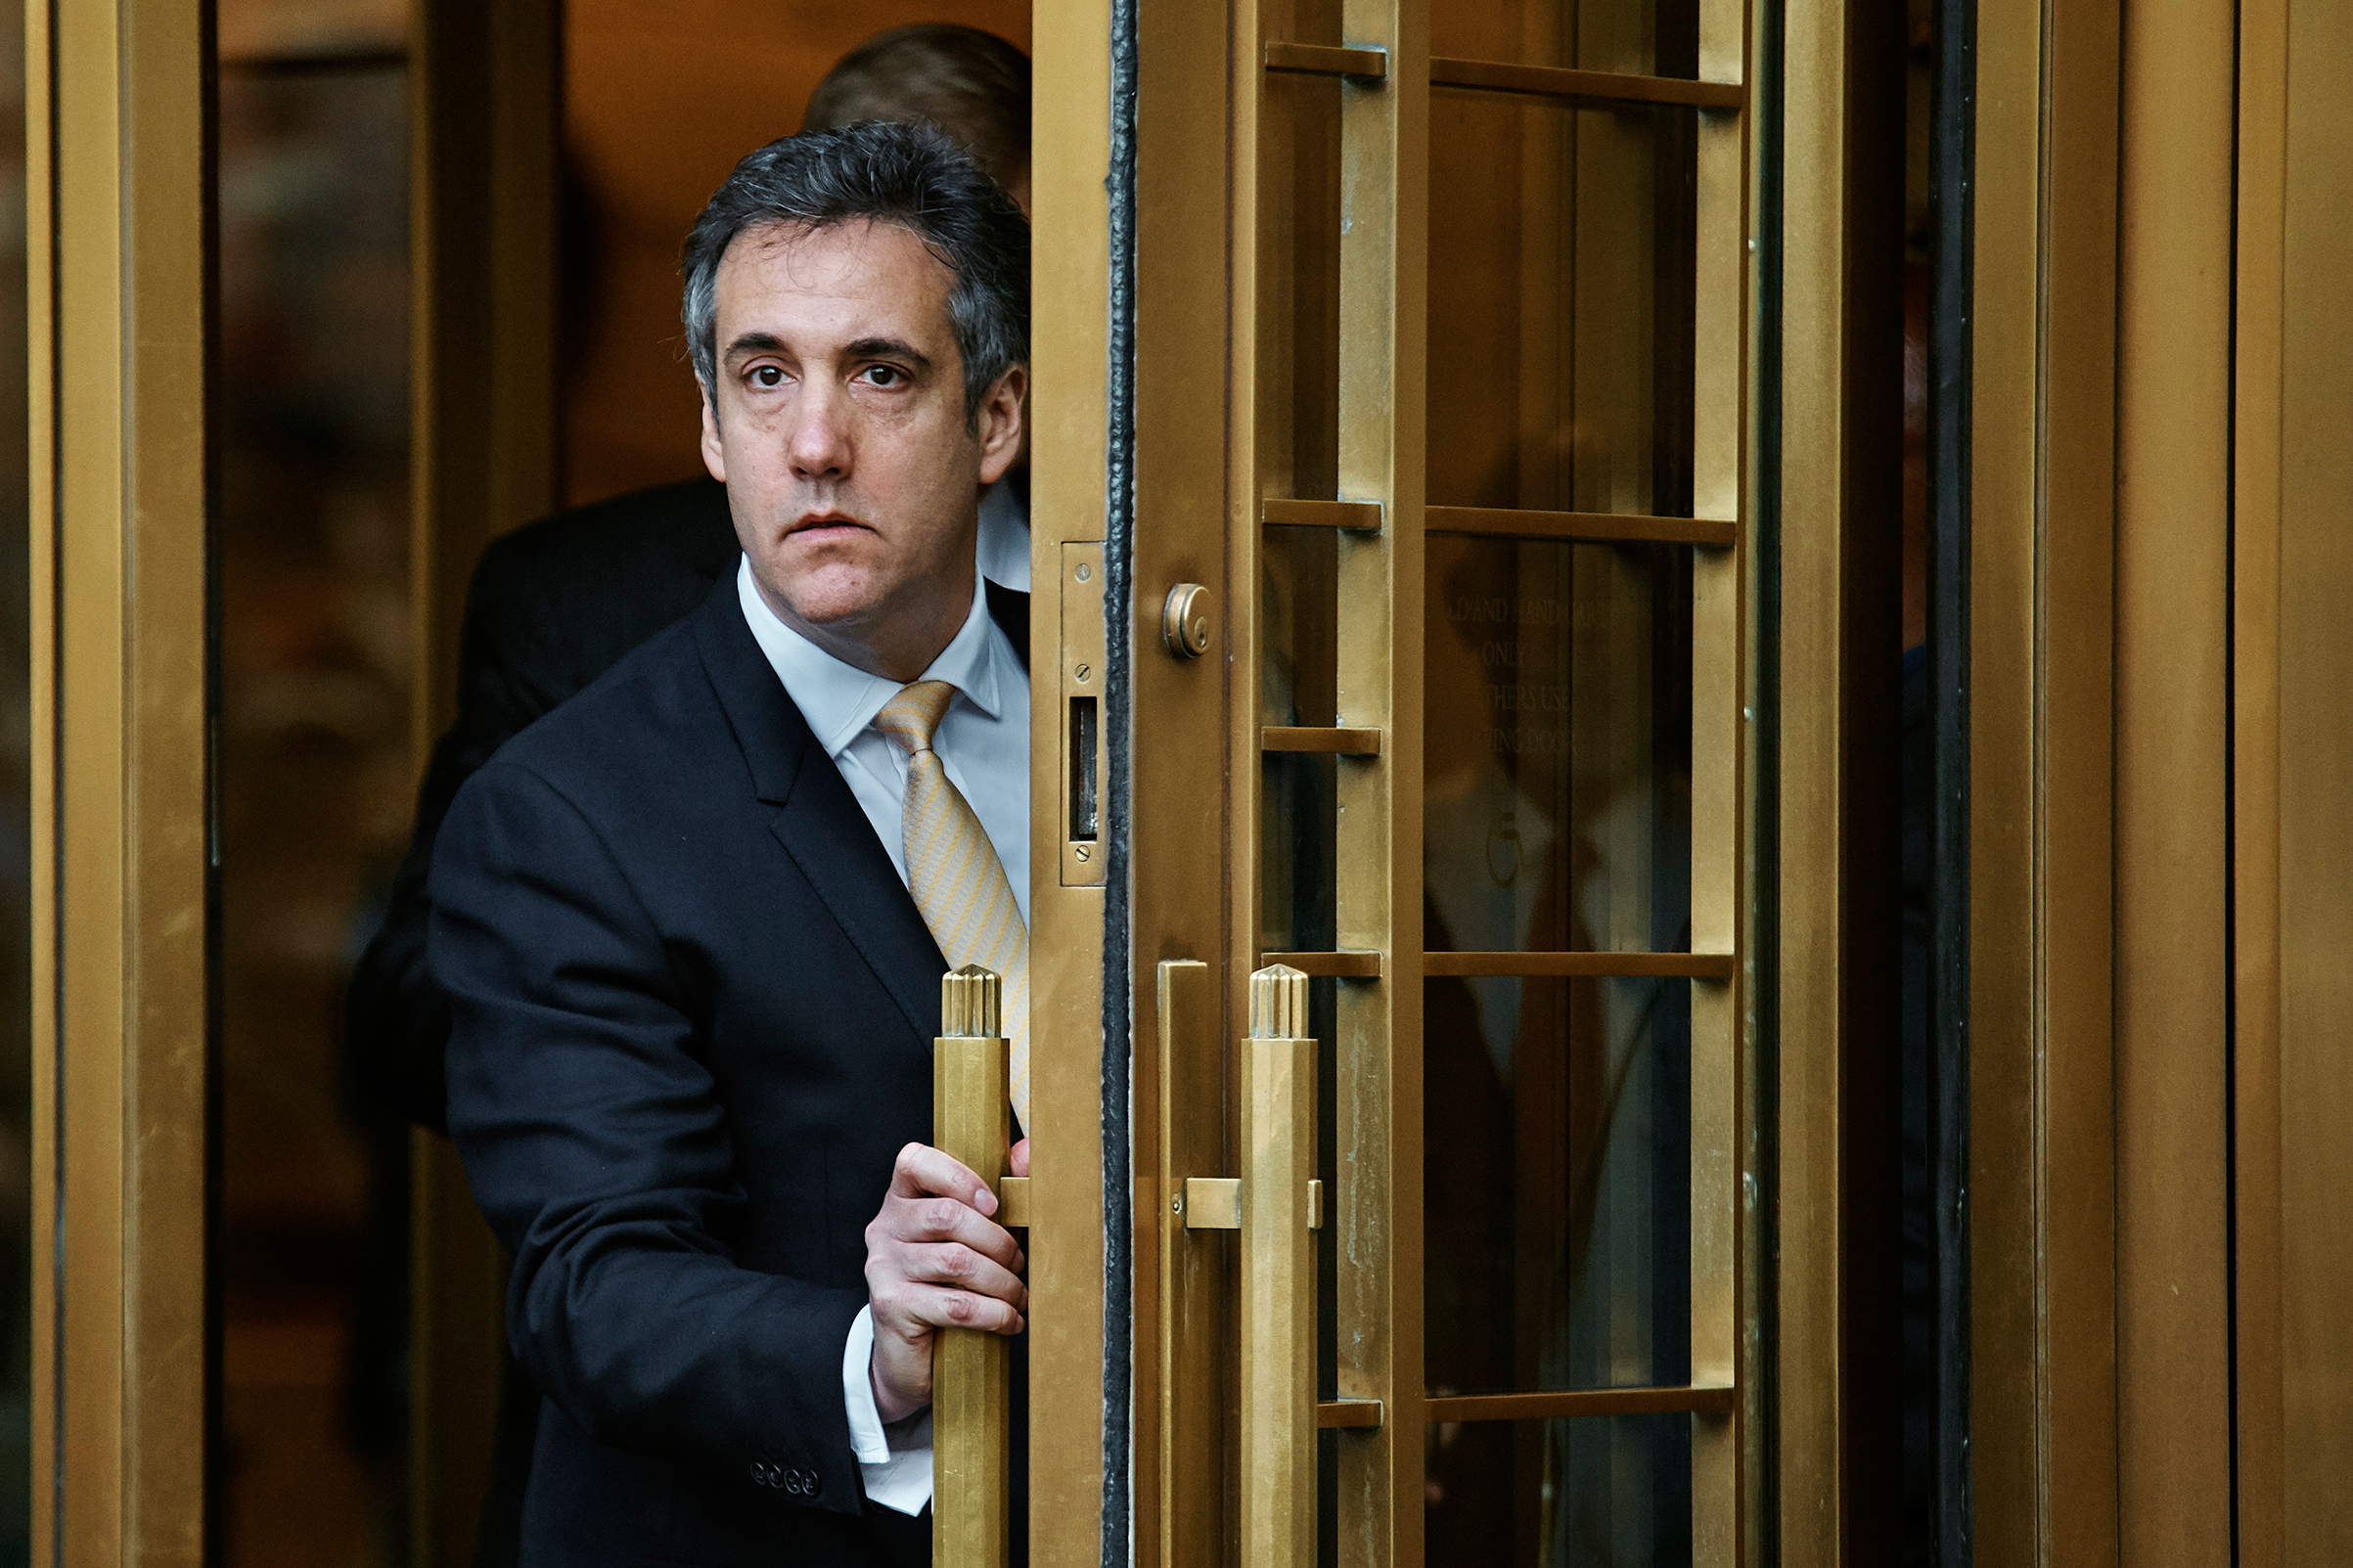 Michael Cohen, the President’s longtime personal lawyer, leaves federal court in Manhattan on Aug. 21 (Andres Kudacki—The New York Times/Redux)